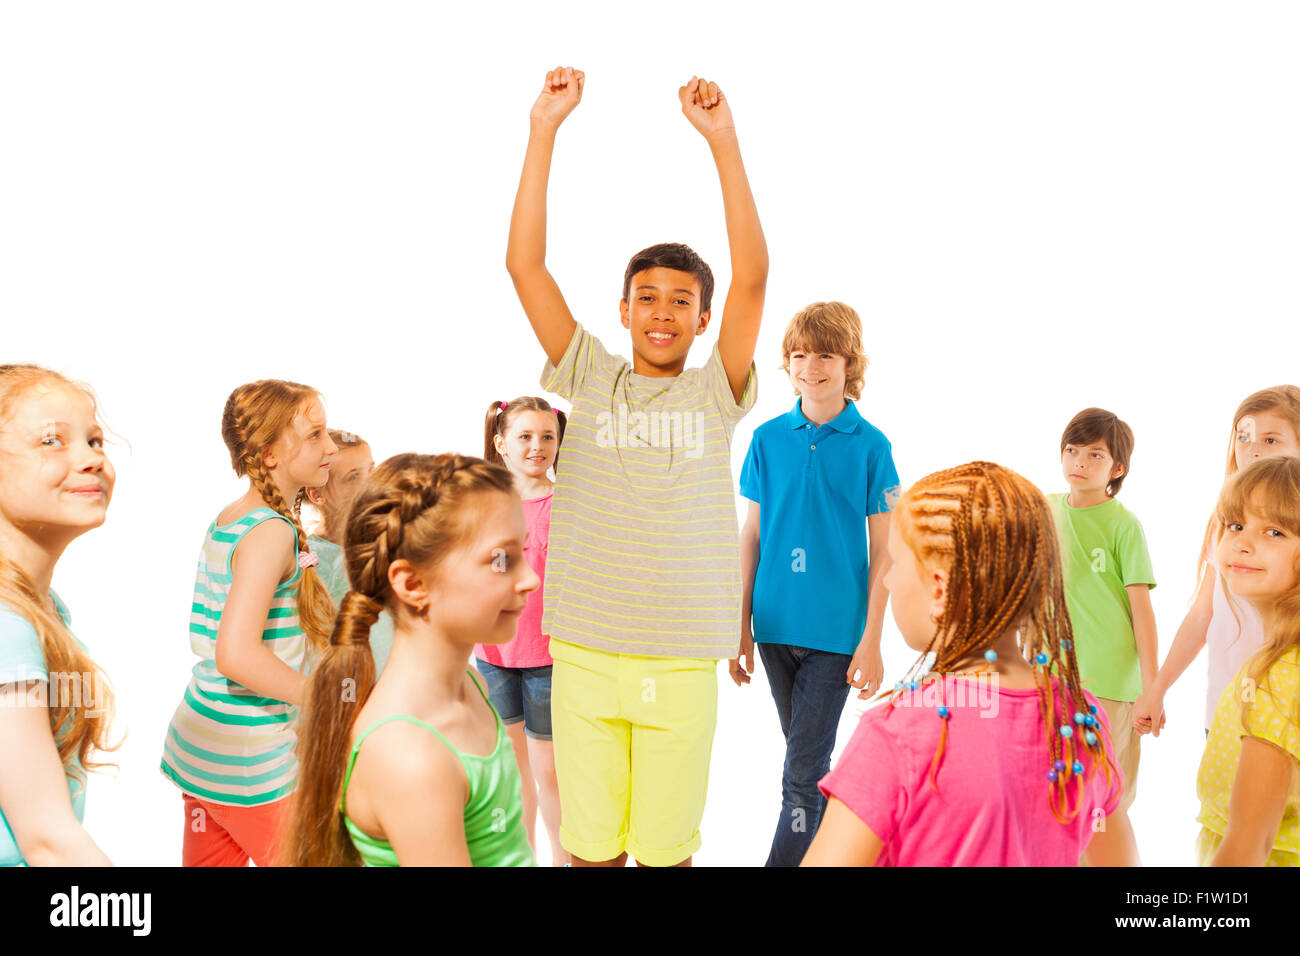 Boy stand in the crowd with lifted hands Stock Photo